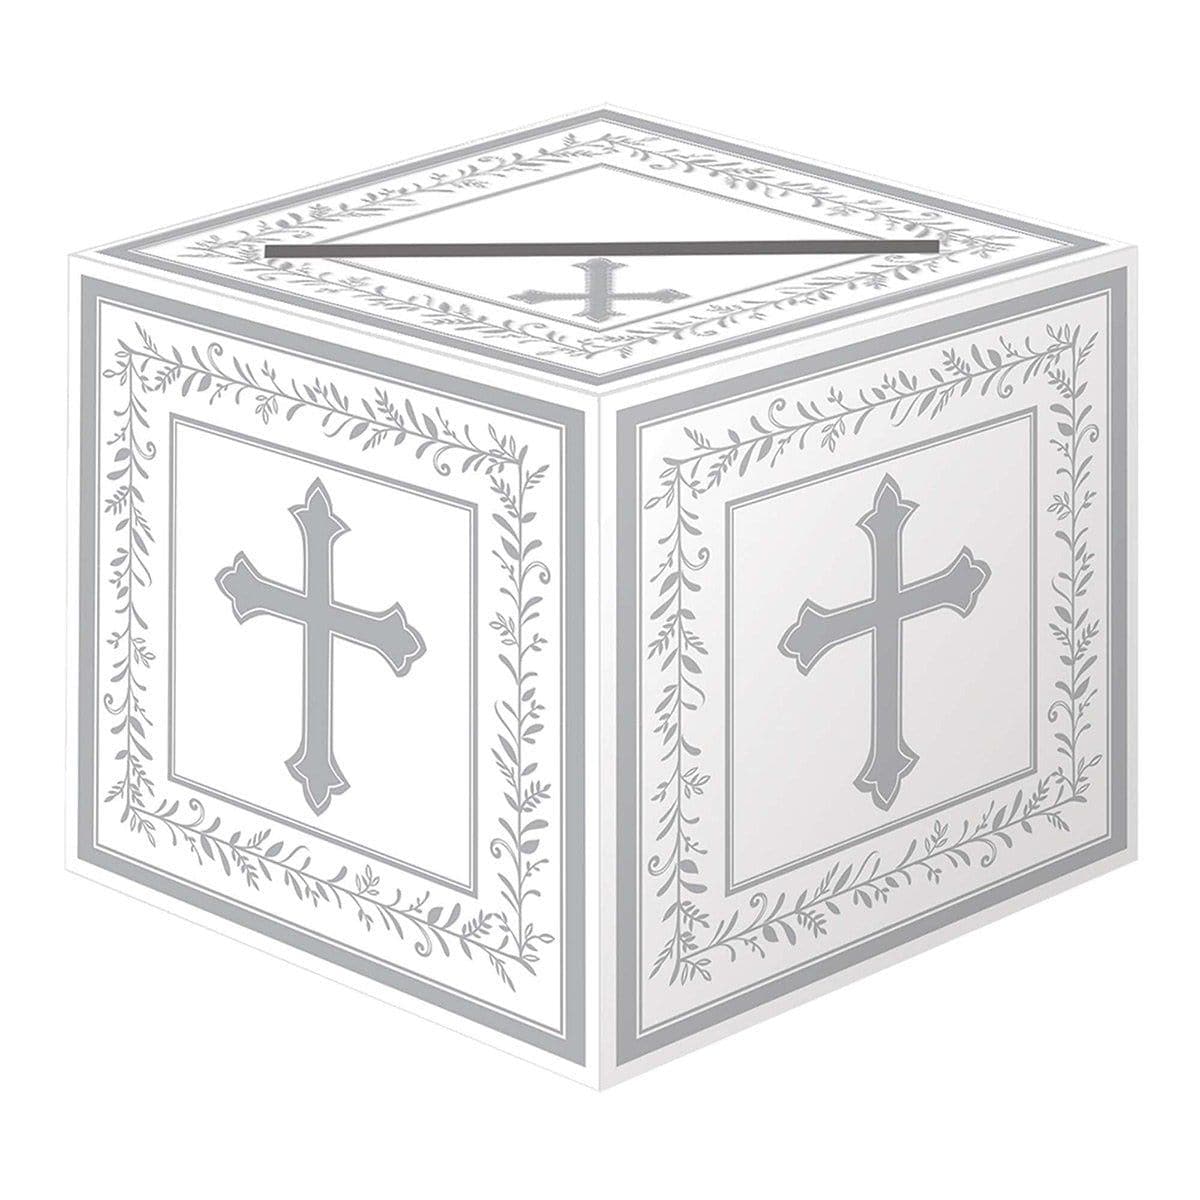 Buy Religious Cross Card Holder Box sold at Party Expert